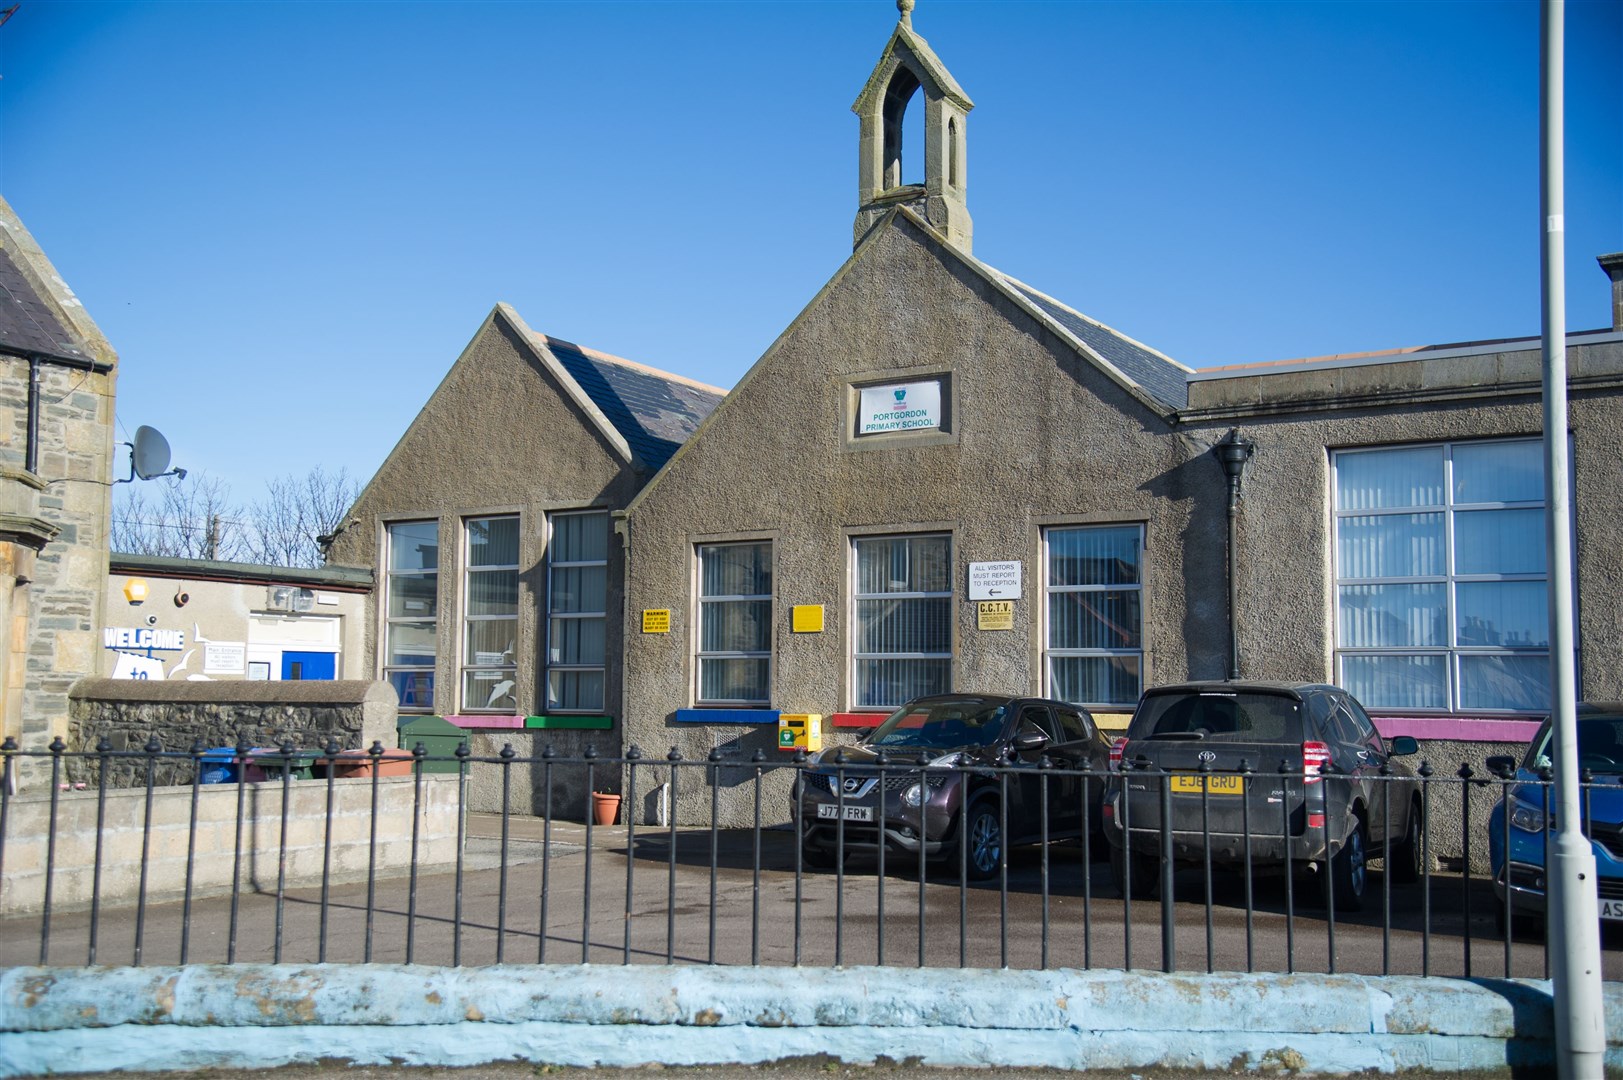 Portgordon Primary School was described as "friendly, warm and welcoming" by inspectors.